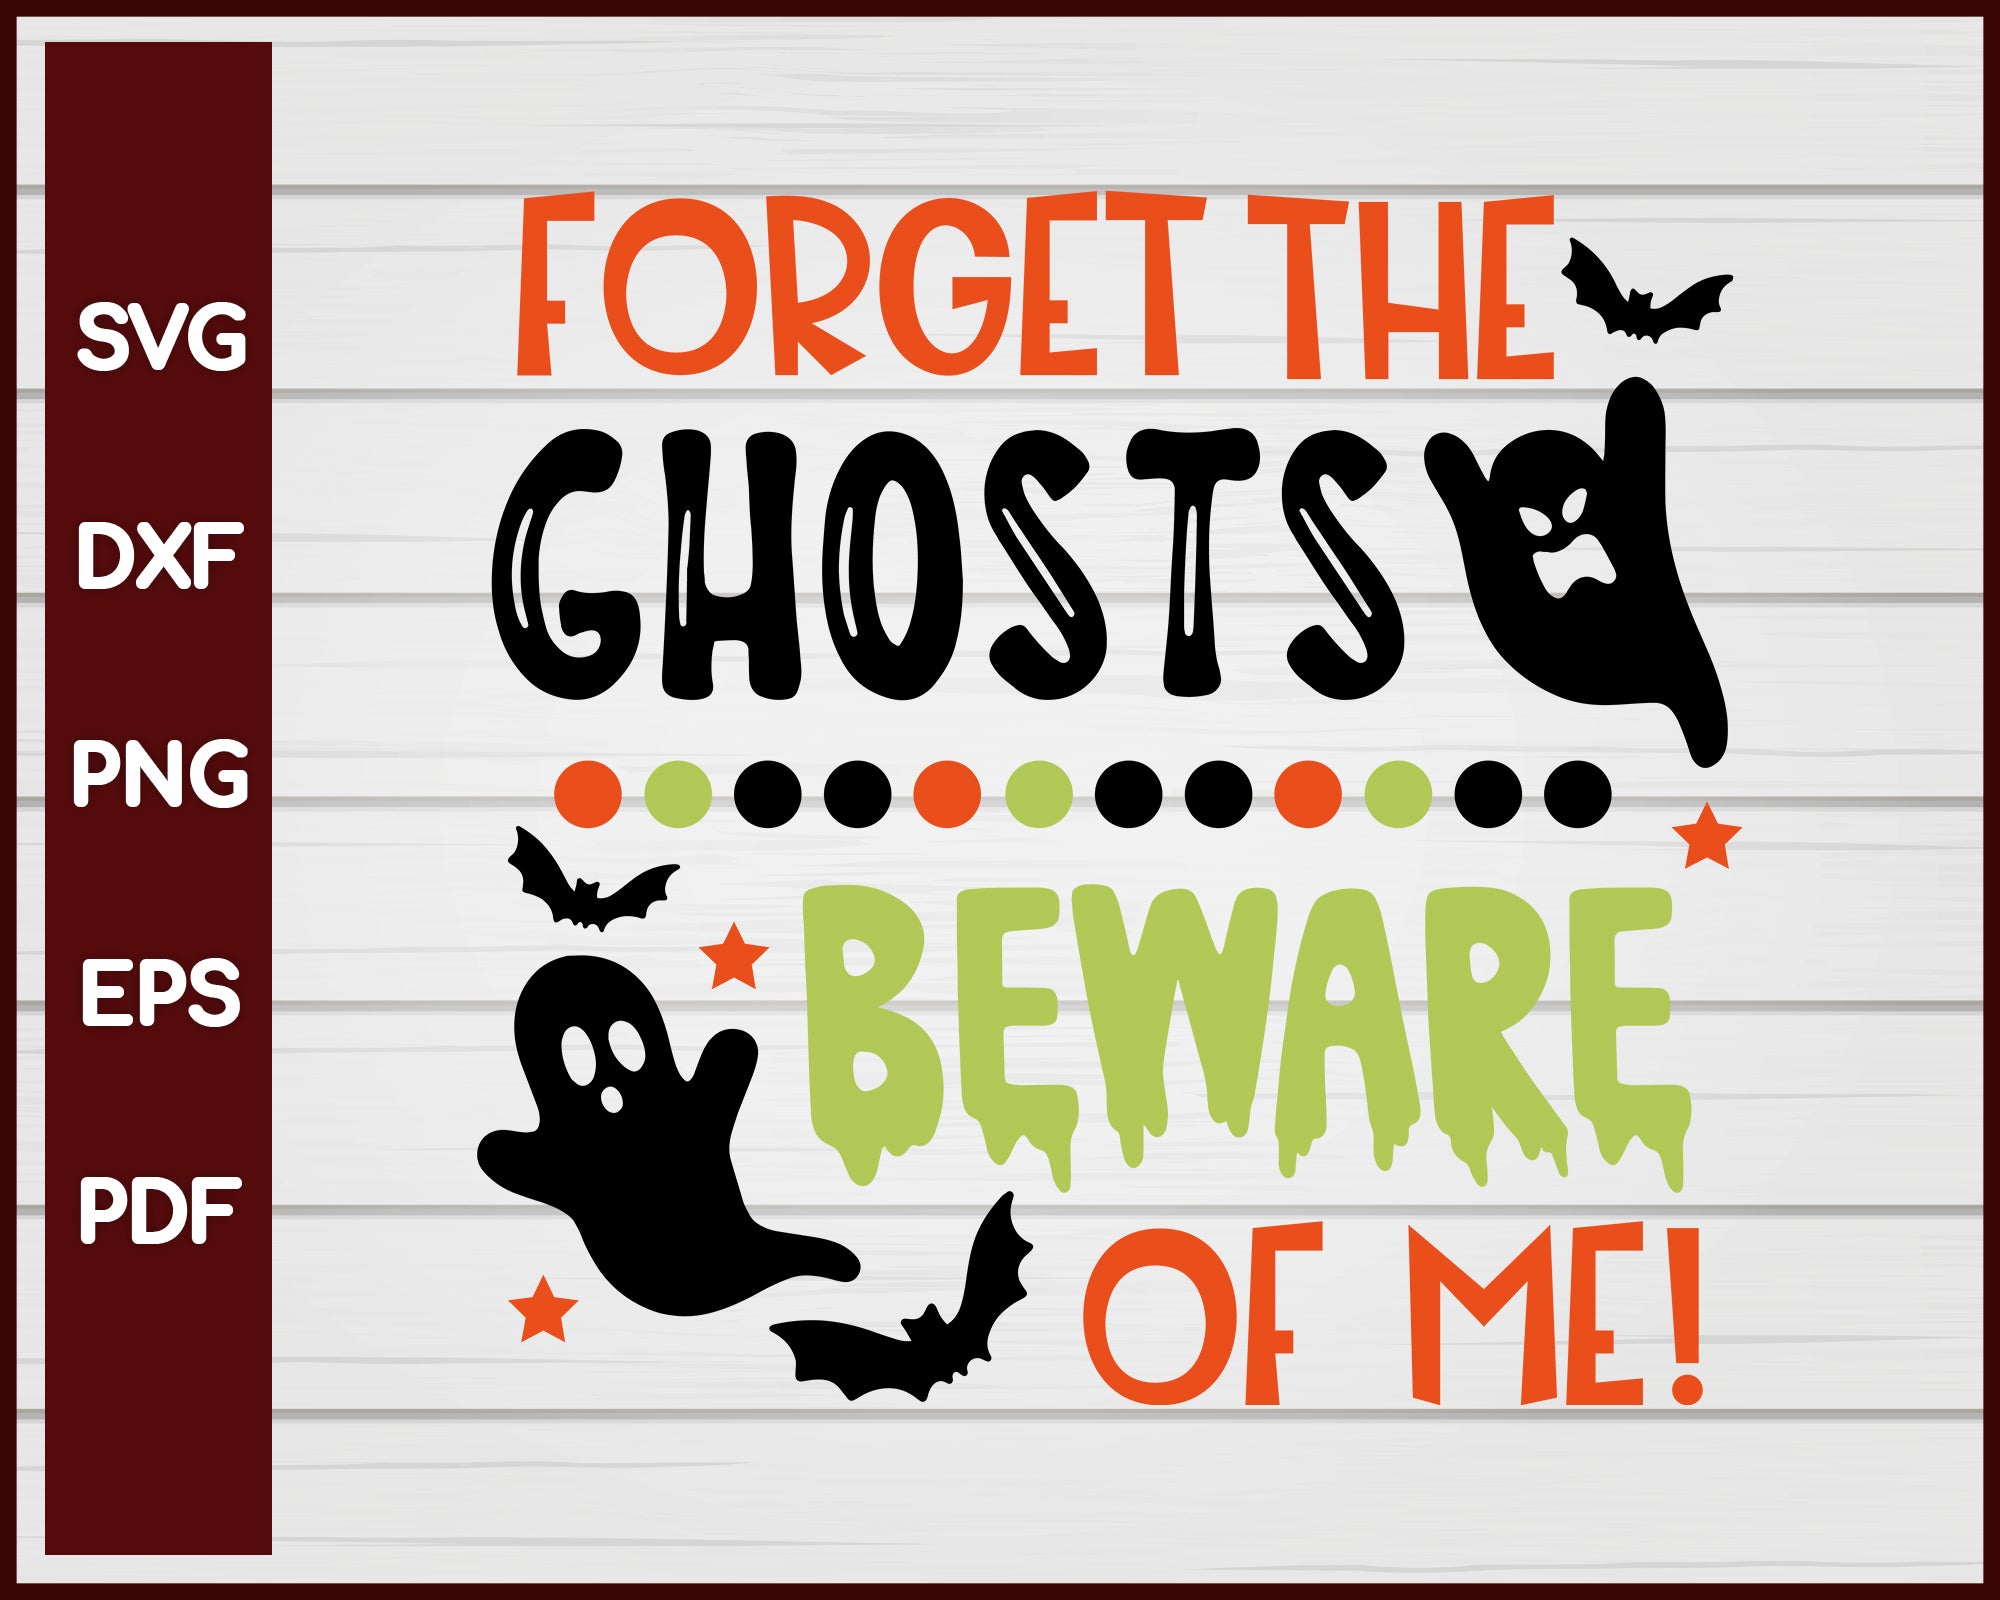 Forget The Ghosts Beware Of Me Halloween T-shirt Design svg